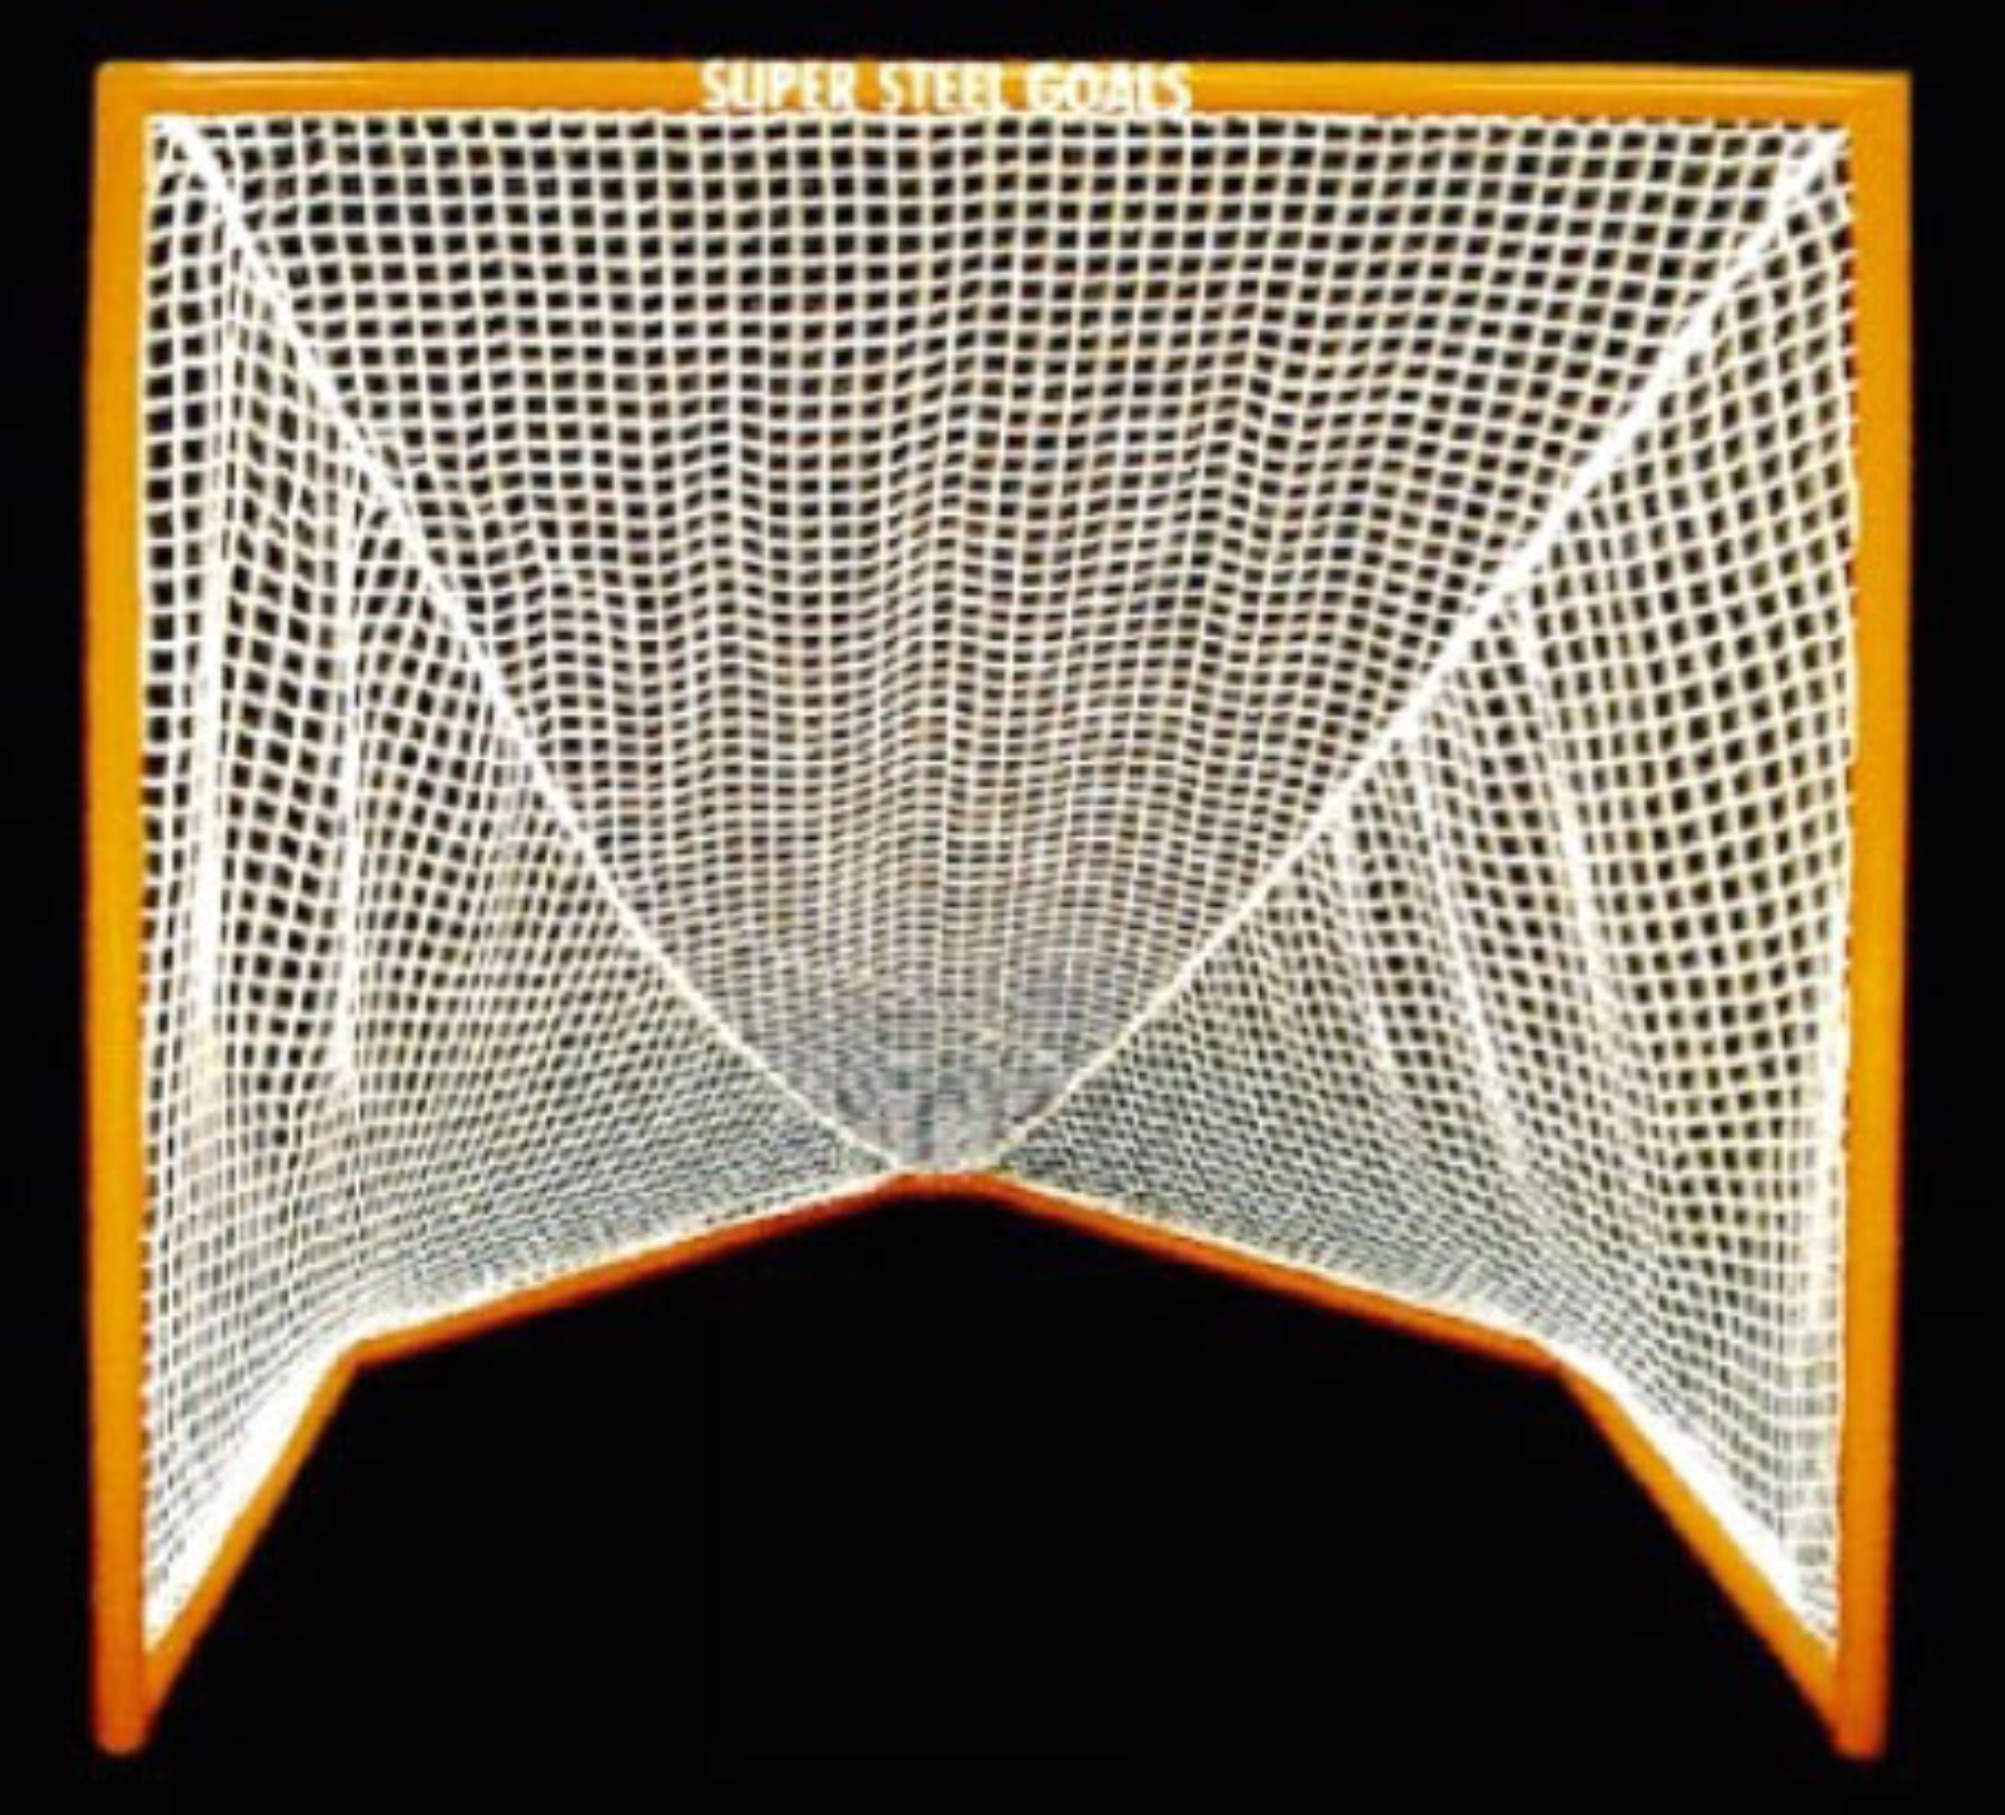 Lacrosse 2000 with Mitered Corners and Lacrosse 1000 with Mandrel Bend Corners; Both Goals have Premium Orange Powder-Coated Finish.